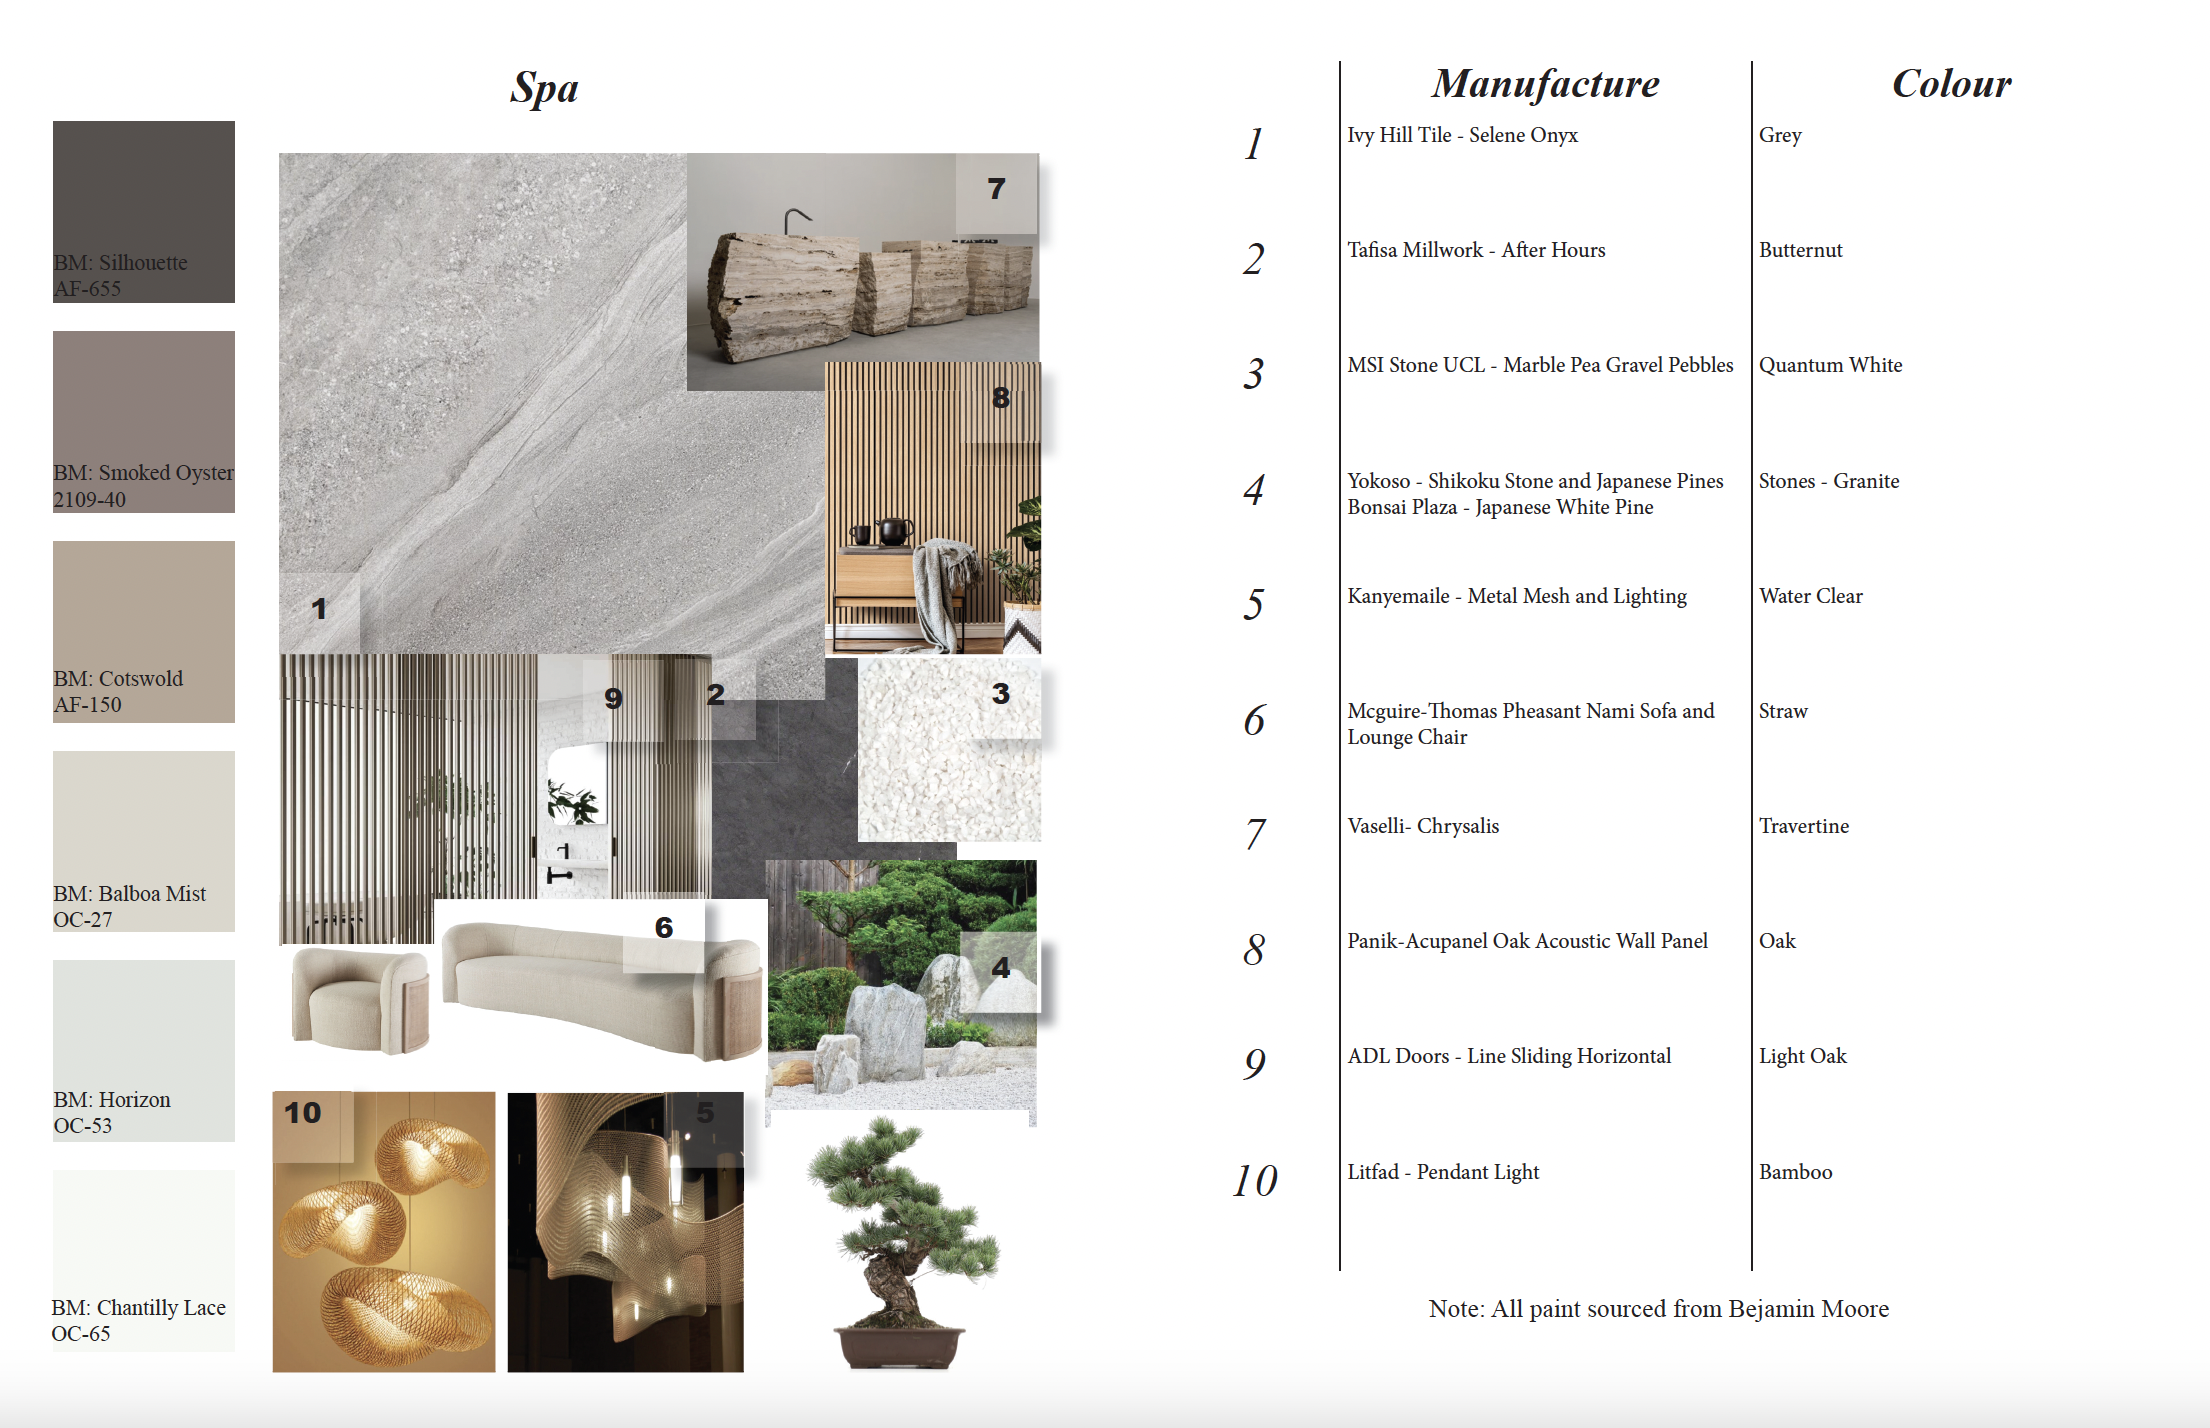 Tudor Hotel Spa Furniture and Material Specifications